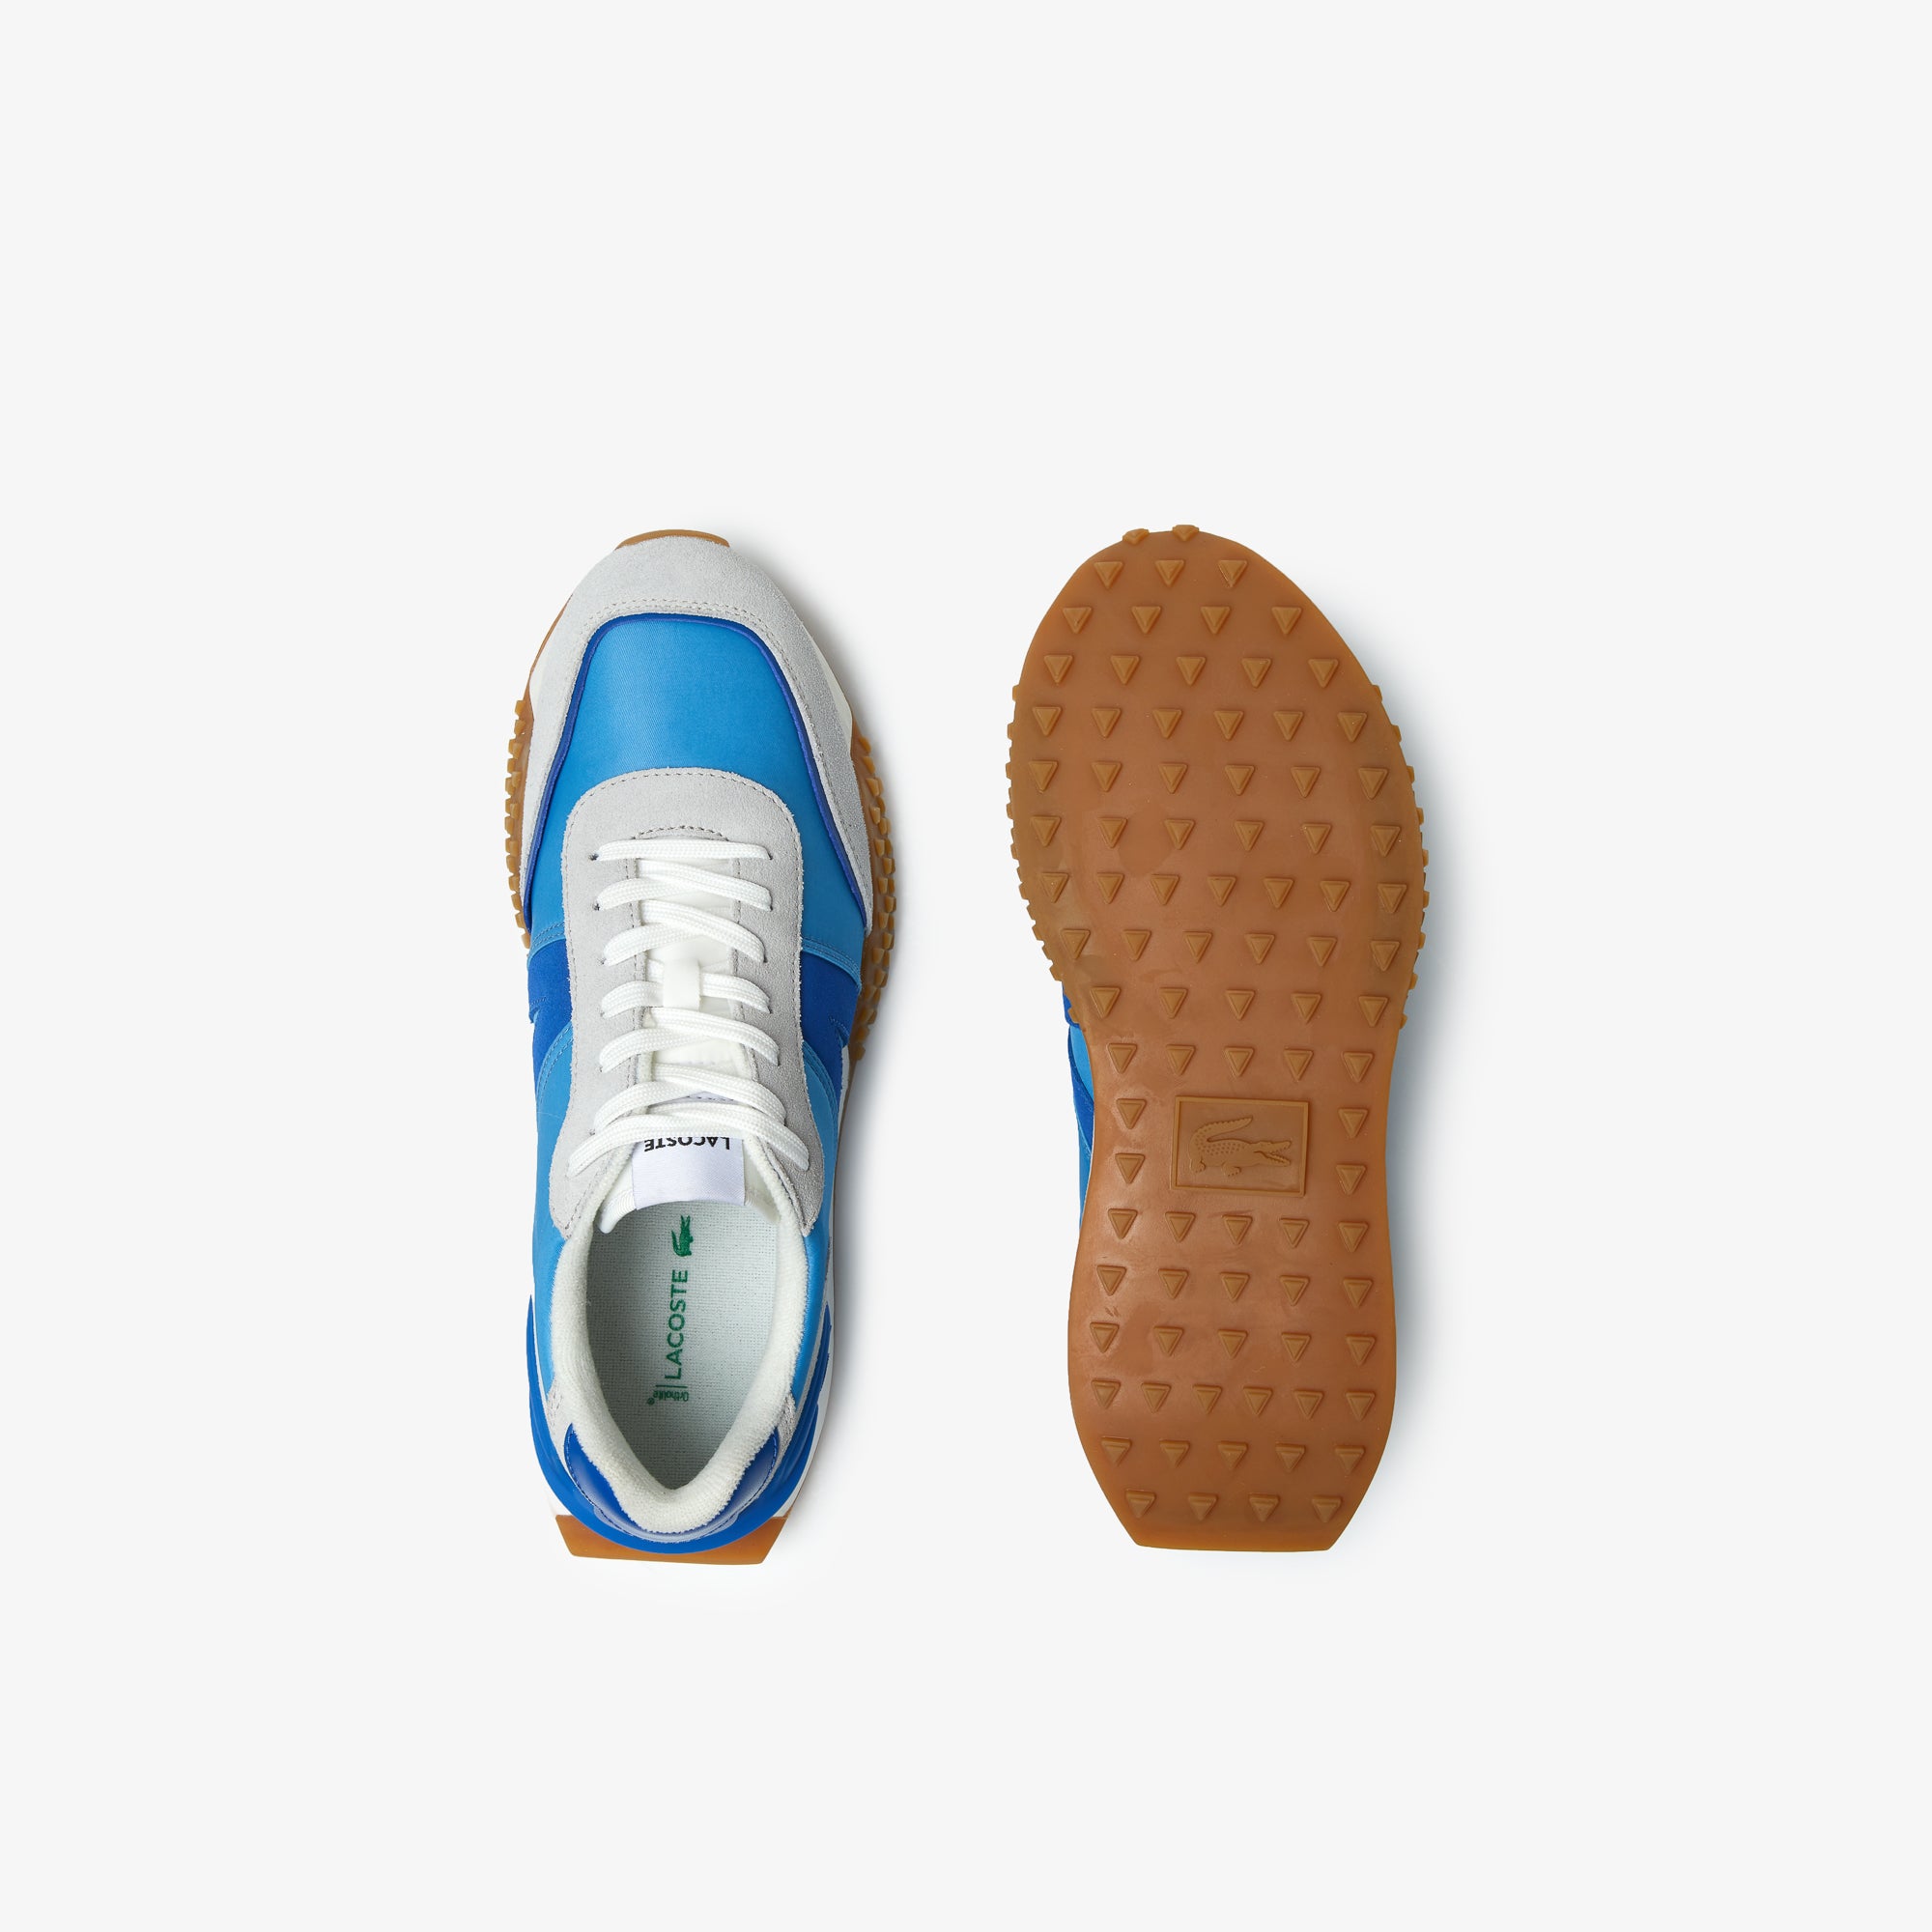 Lacoste Tennis Shoes - L-Spin Deluxe